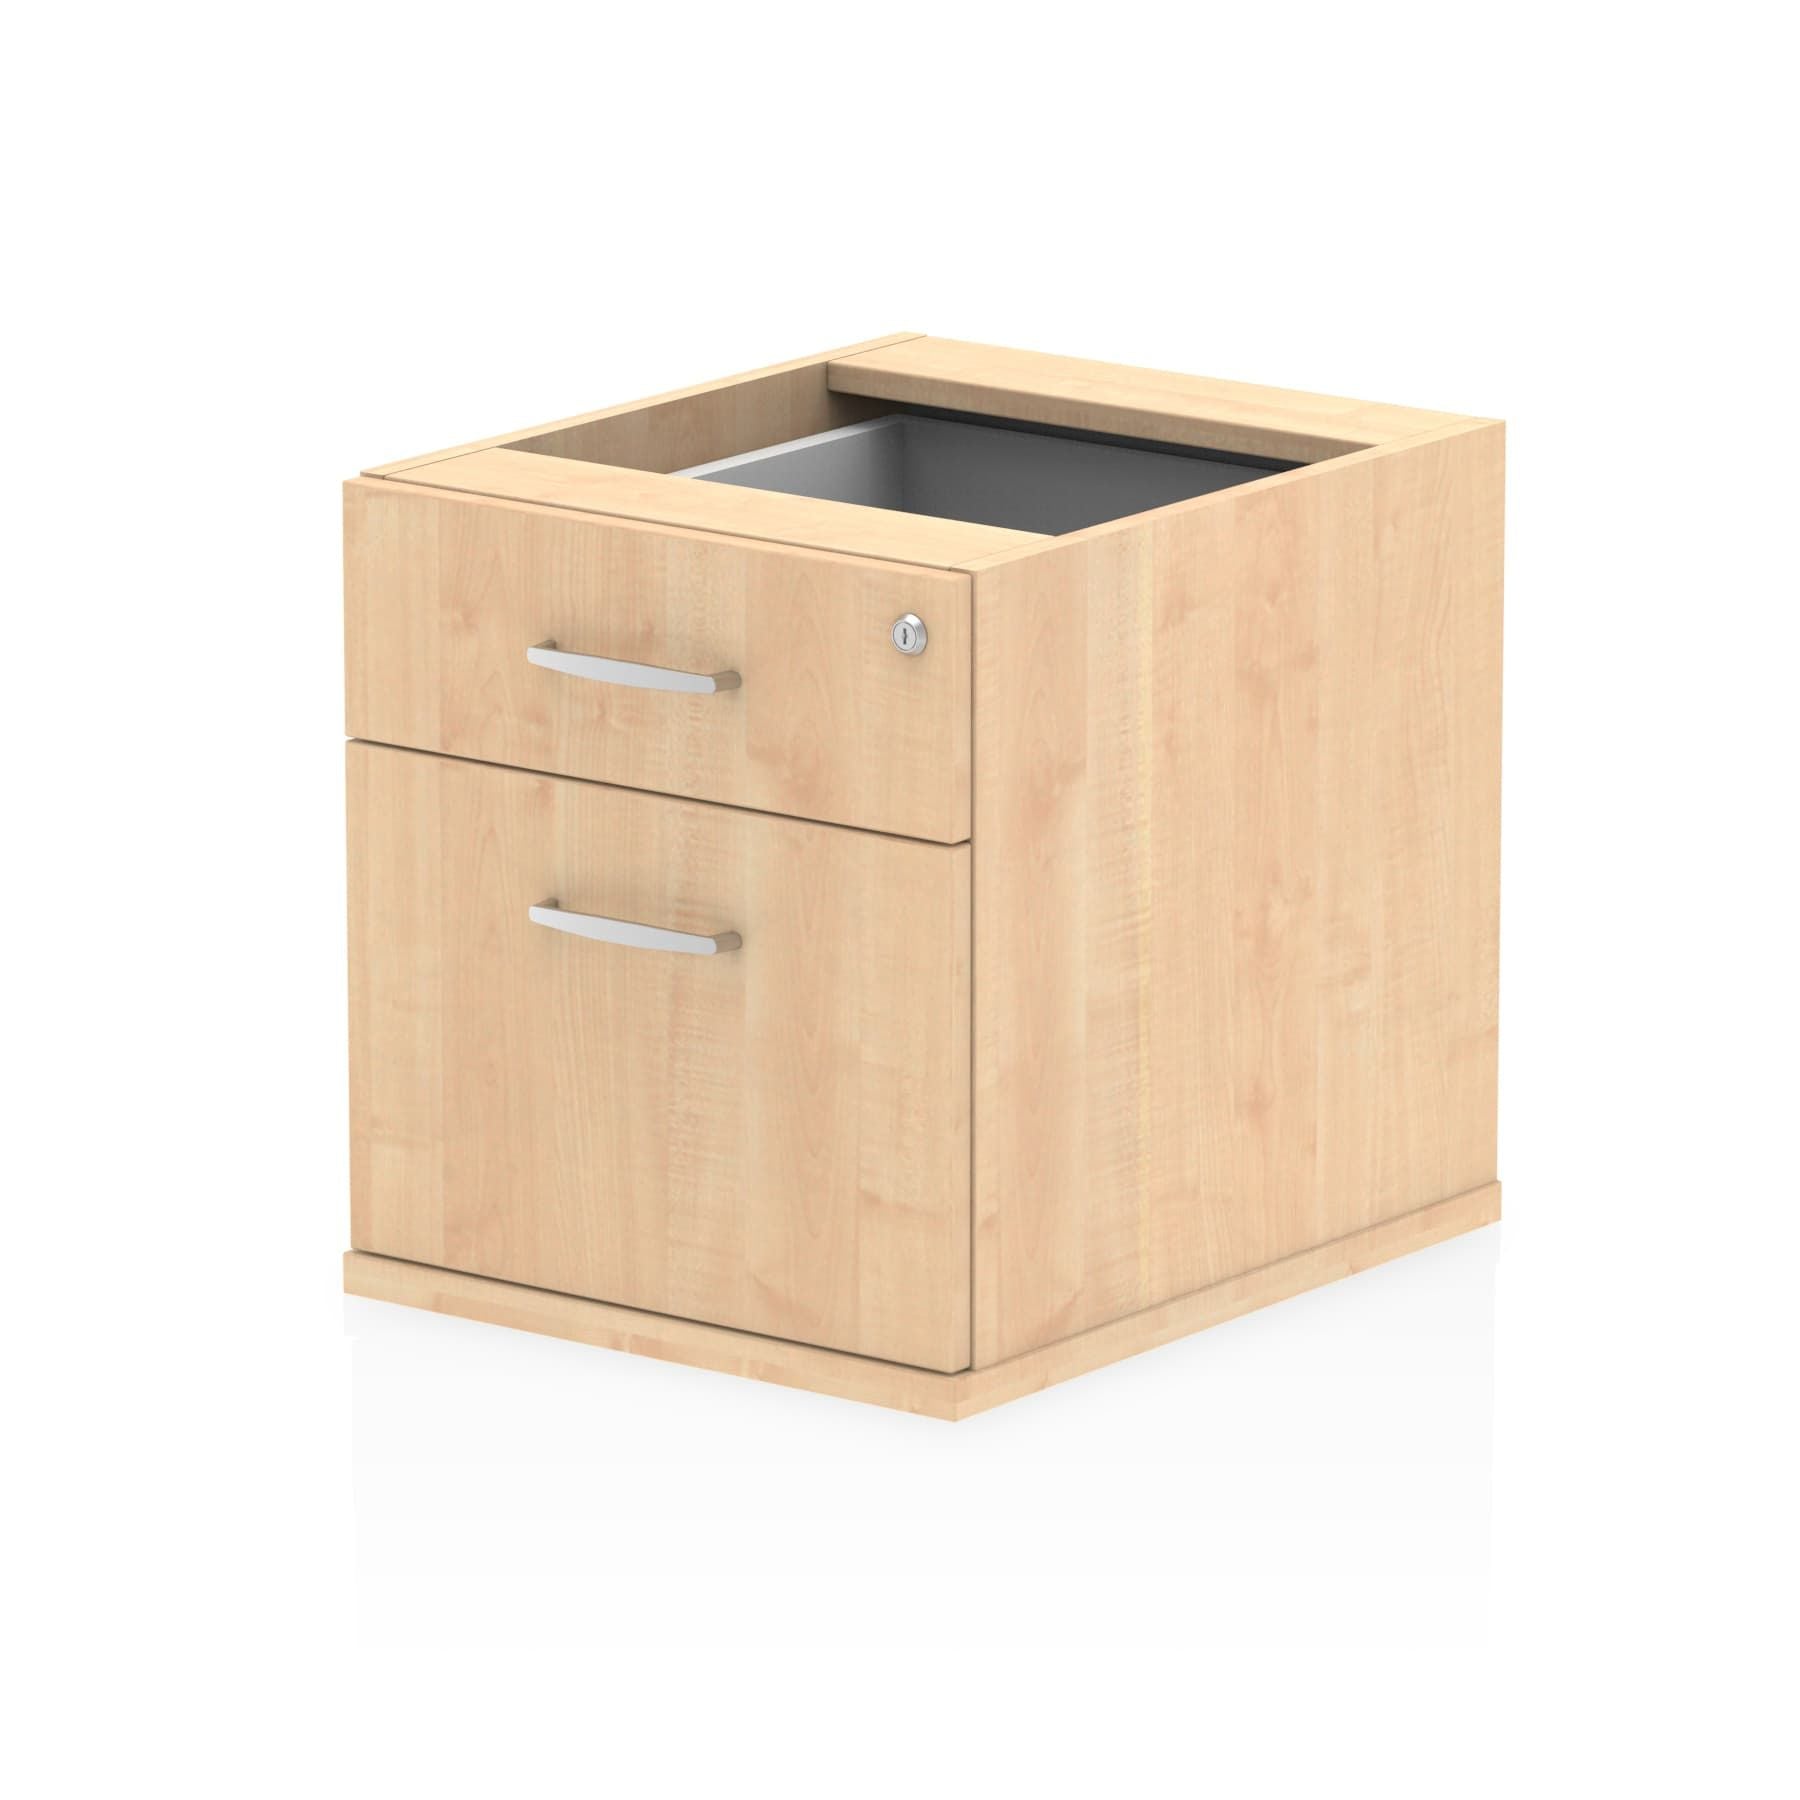 Impulse Fixed Pedestal - 2/3 Lockable Drawers, MFC Material, Self-Assembly, 440x550x473mm, 25mm Thickness, 5-Year Guarantee